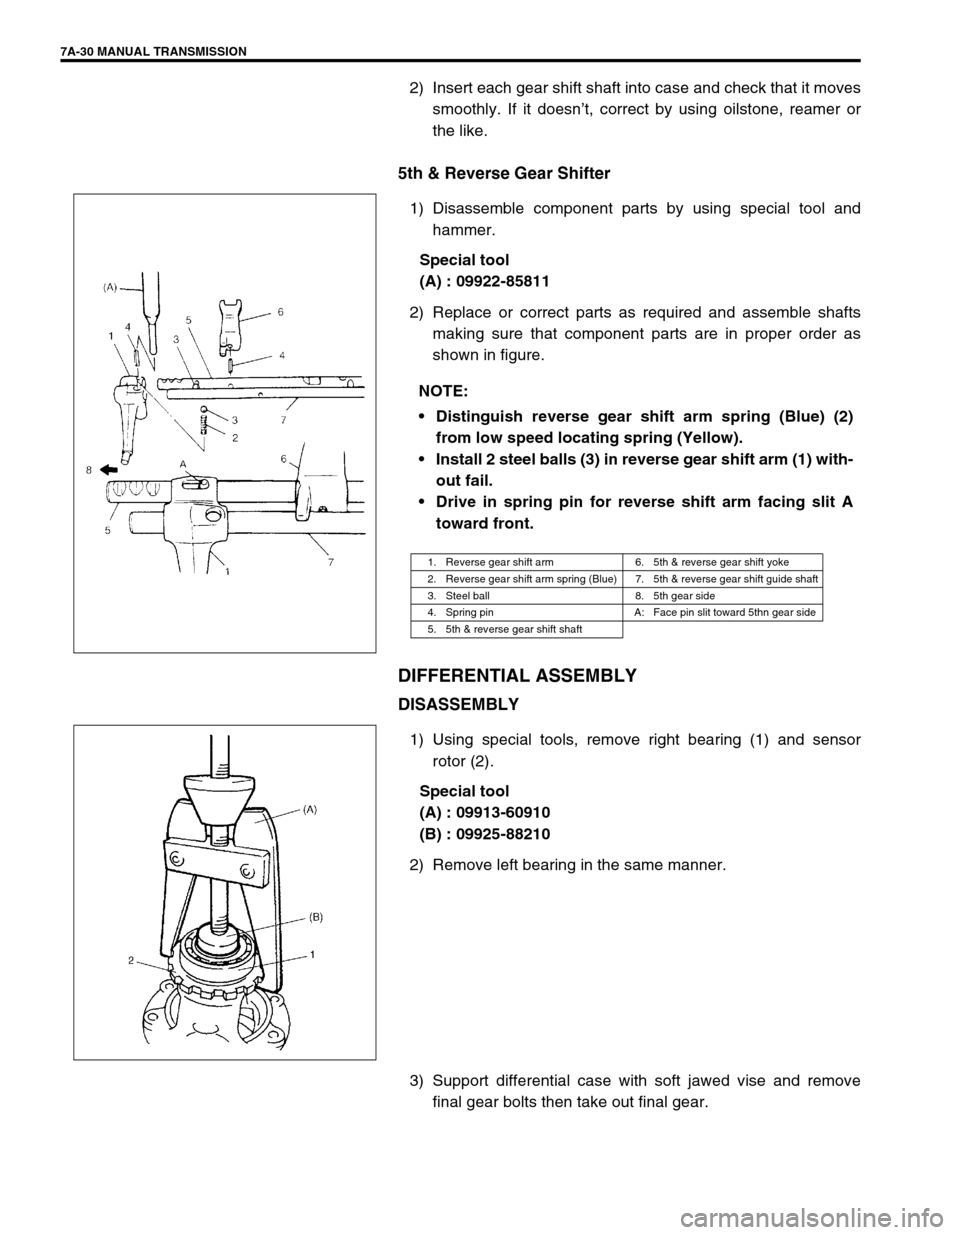 SUZUKI SWIFT 2000 1.G Transmission Service Workshop Manual 7A-30 MANUAL TRANSMISSION
2) Insert each gear shift shaft into case and check that it moves
smoothly. If it doesn’t, correct by using oilstone, reamer or
the like.
5th & Reverse Gear Shifter
1) Disa